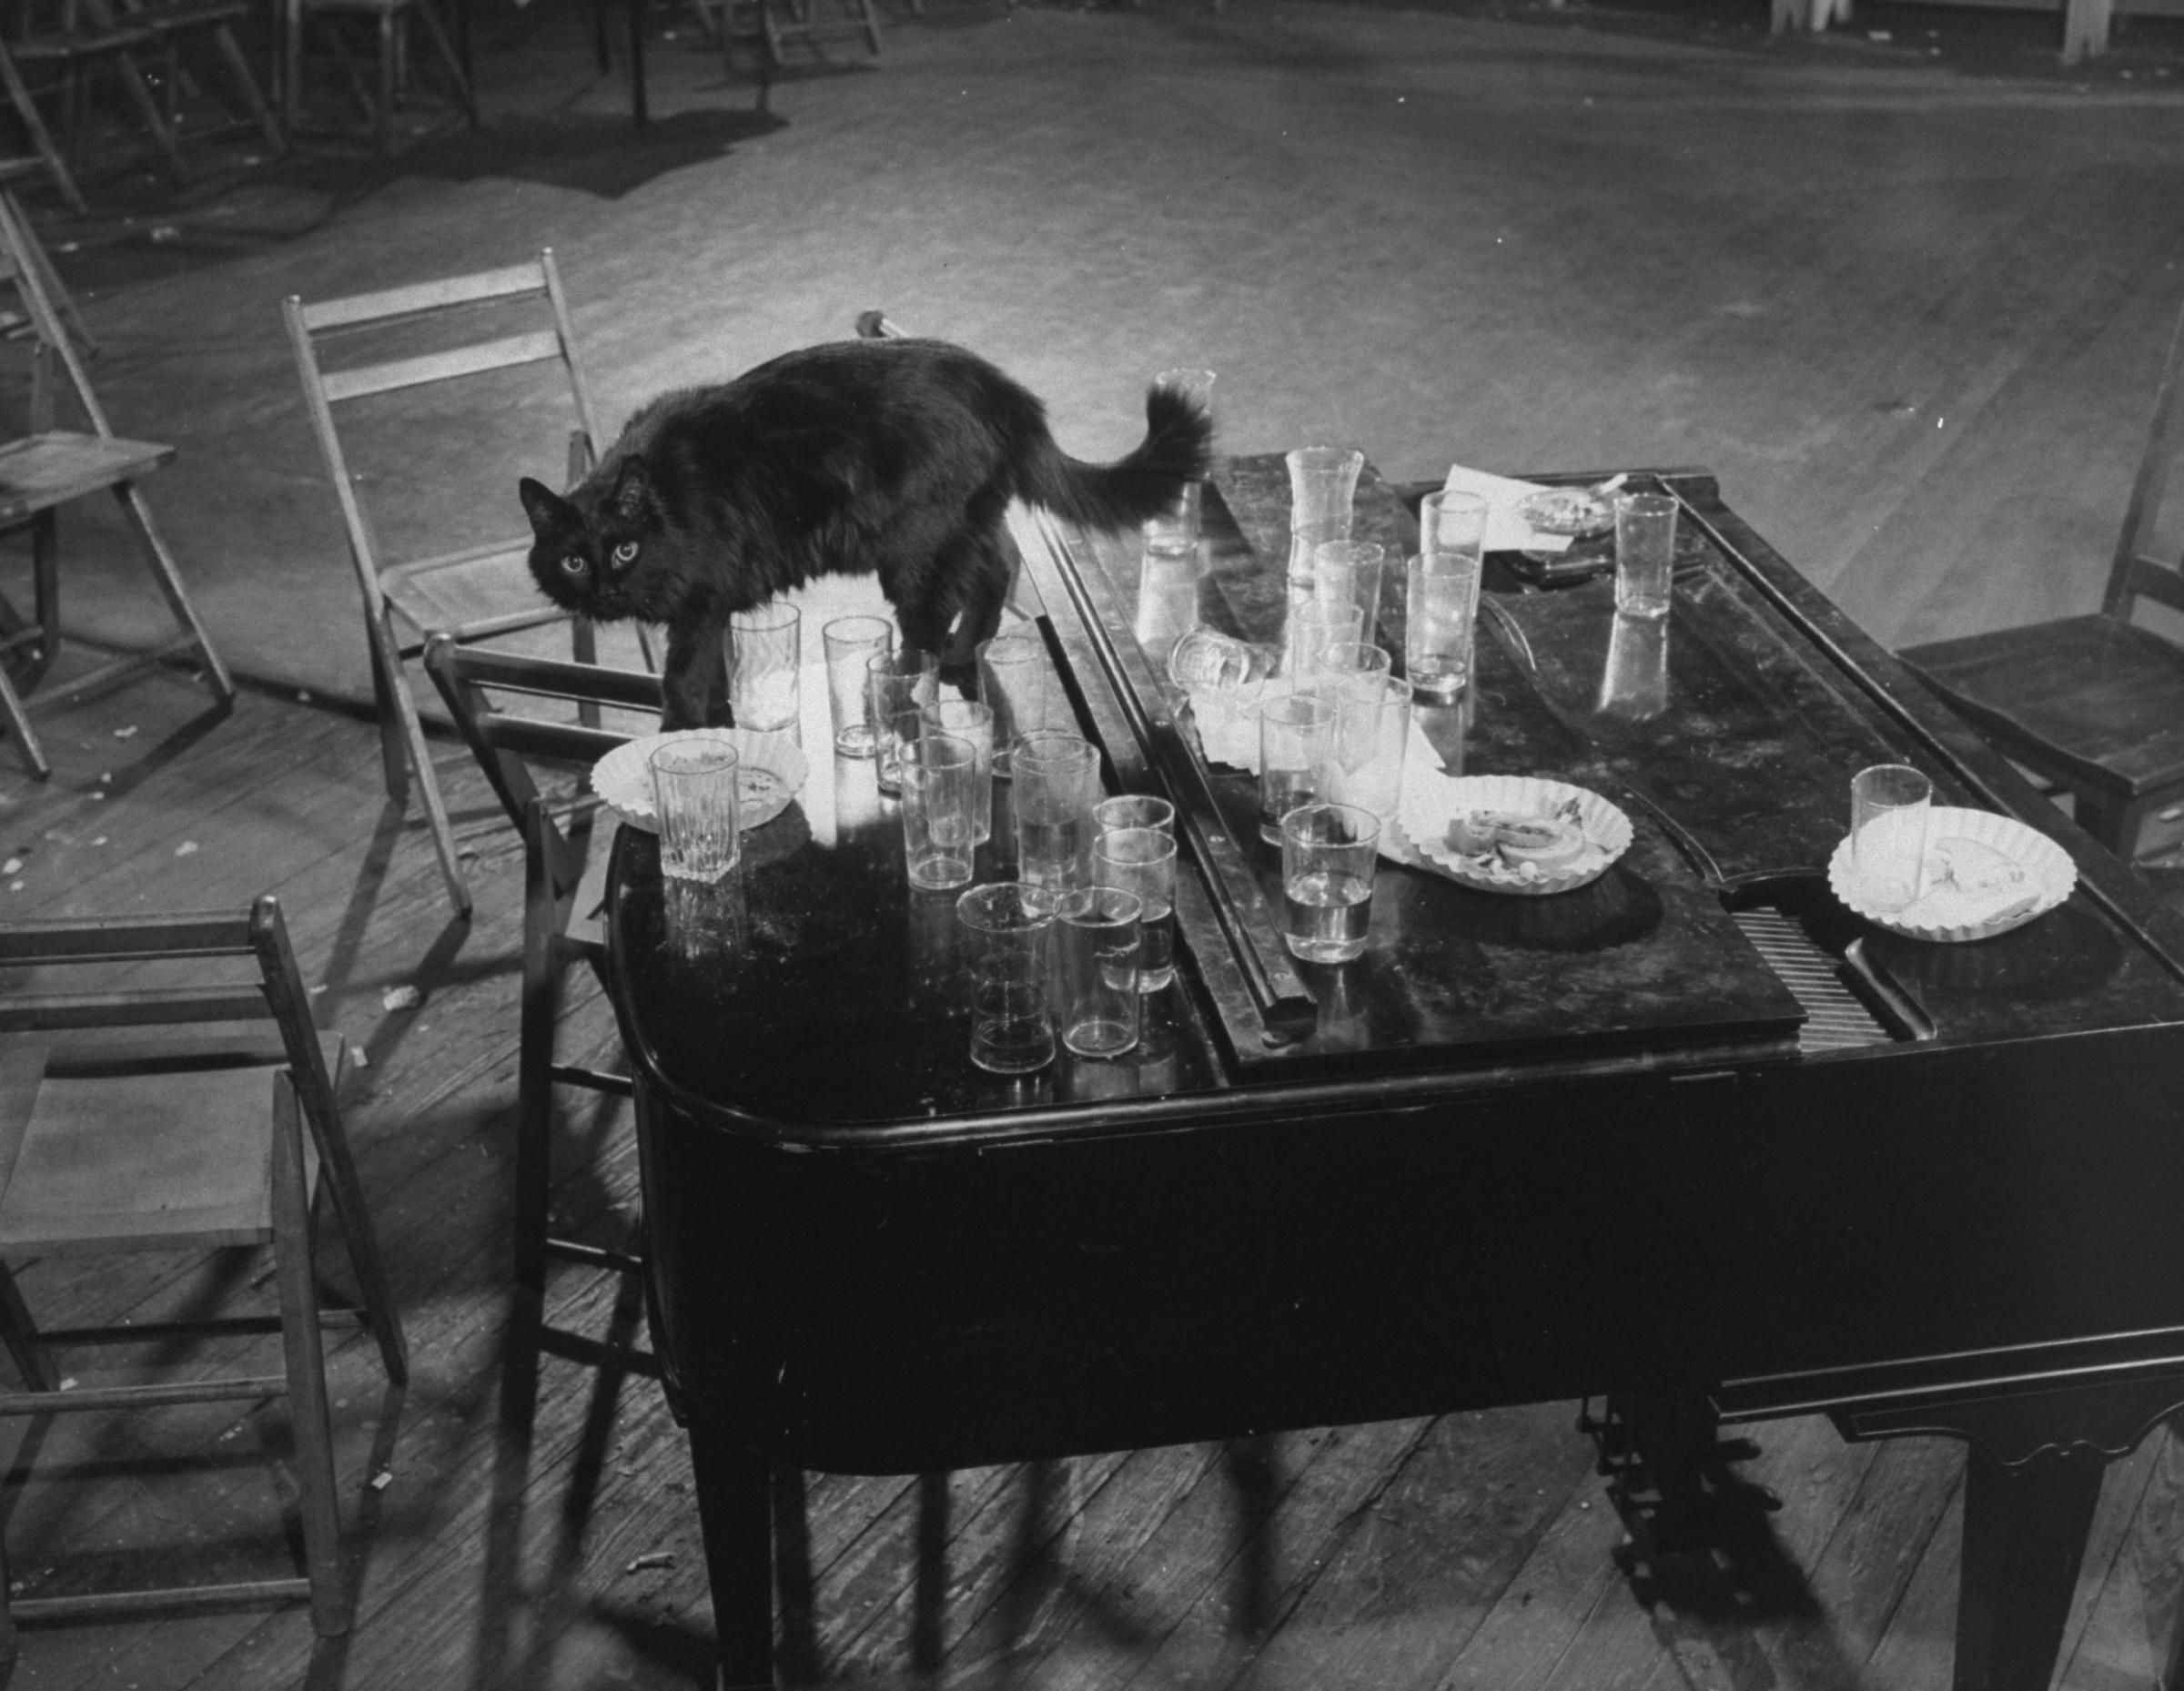 Gjon Mili's cat Blackie steps gingerly among empty glasses left on top of the piano after an all-night jam session at his (Mili's, not the cat's) studio, 1942.